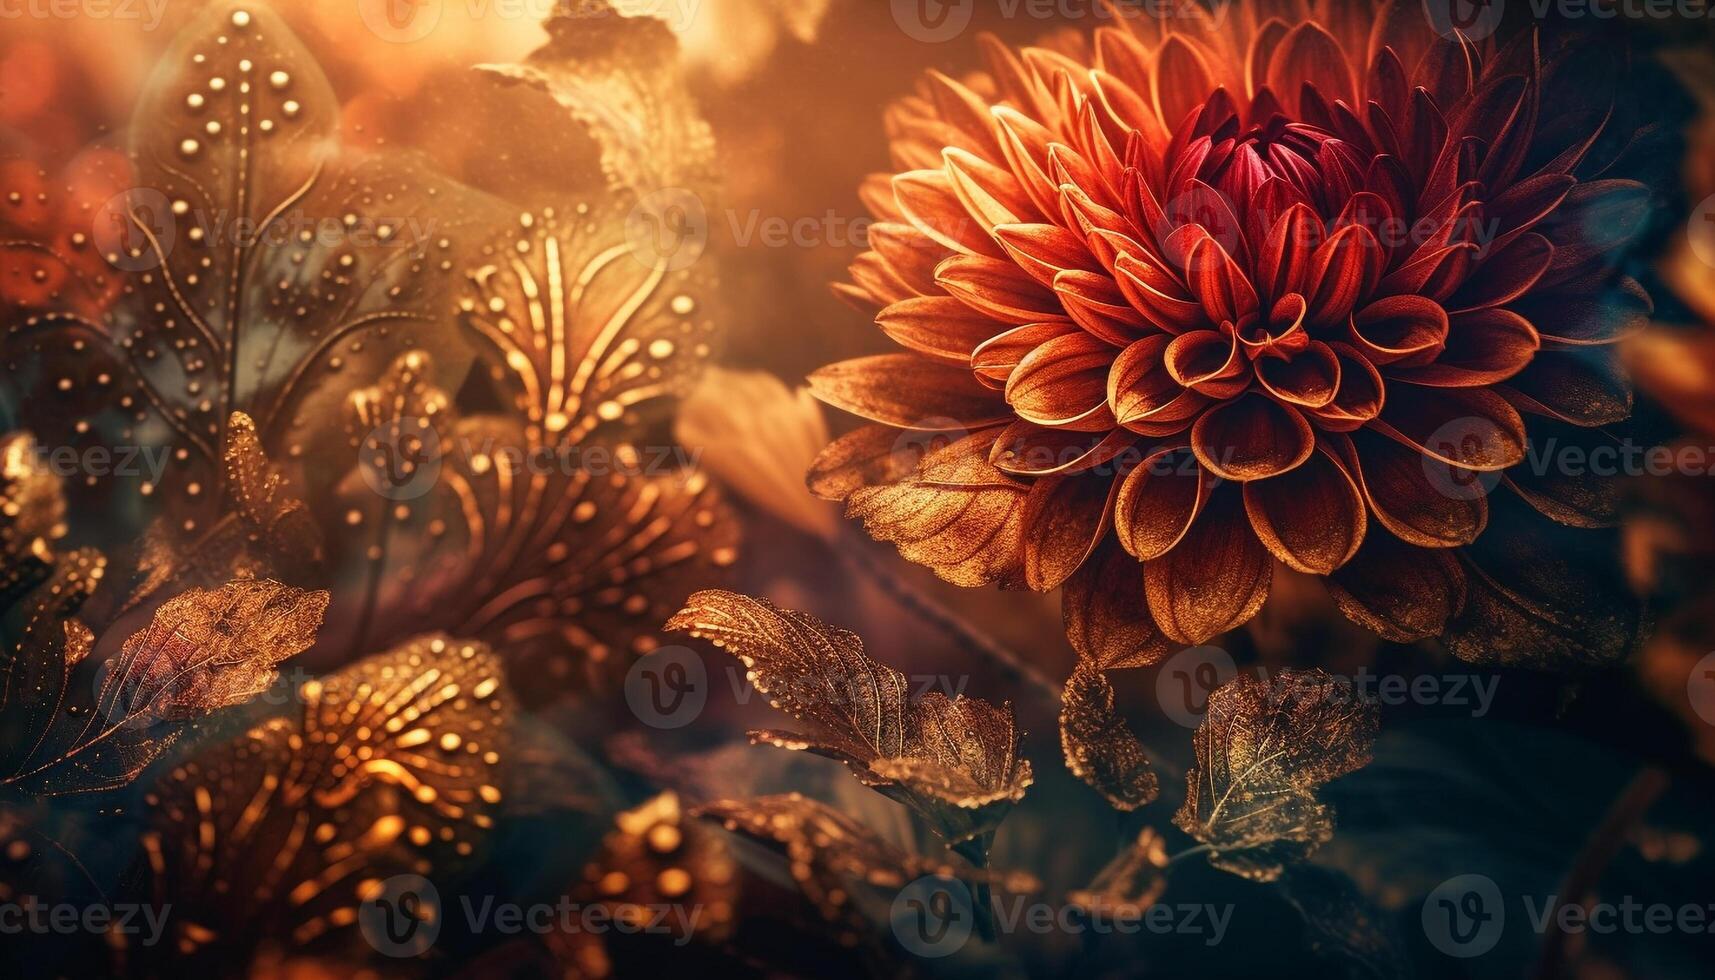 Growth of Love Vibrant Chrysanthemum Blossom Decoration generated by AI photo